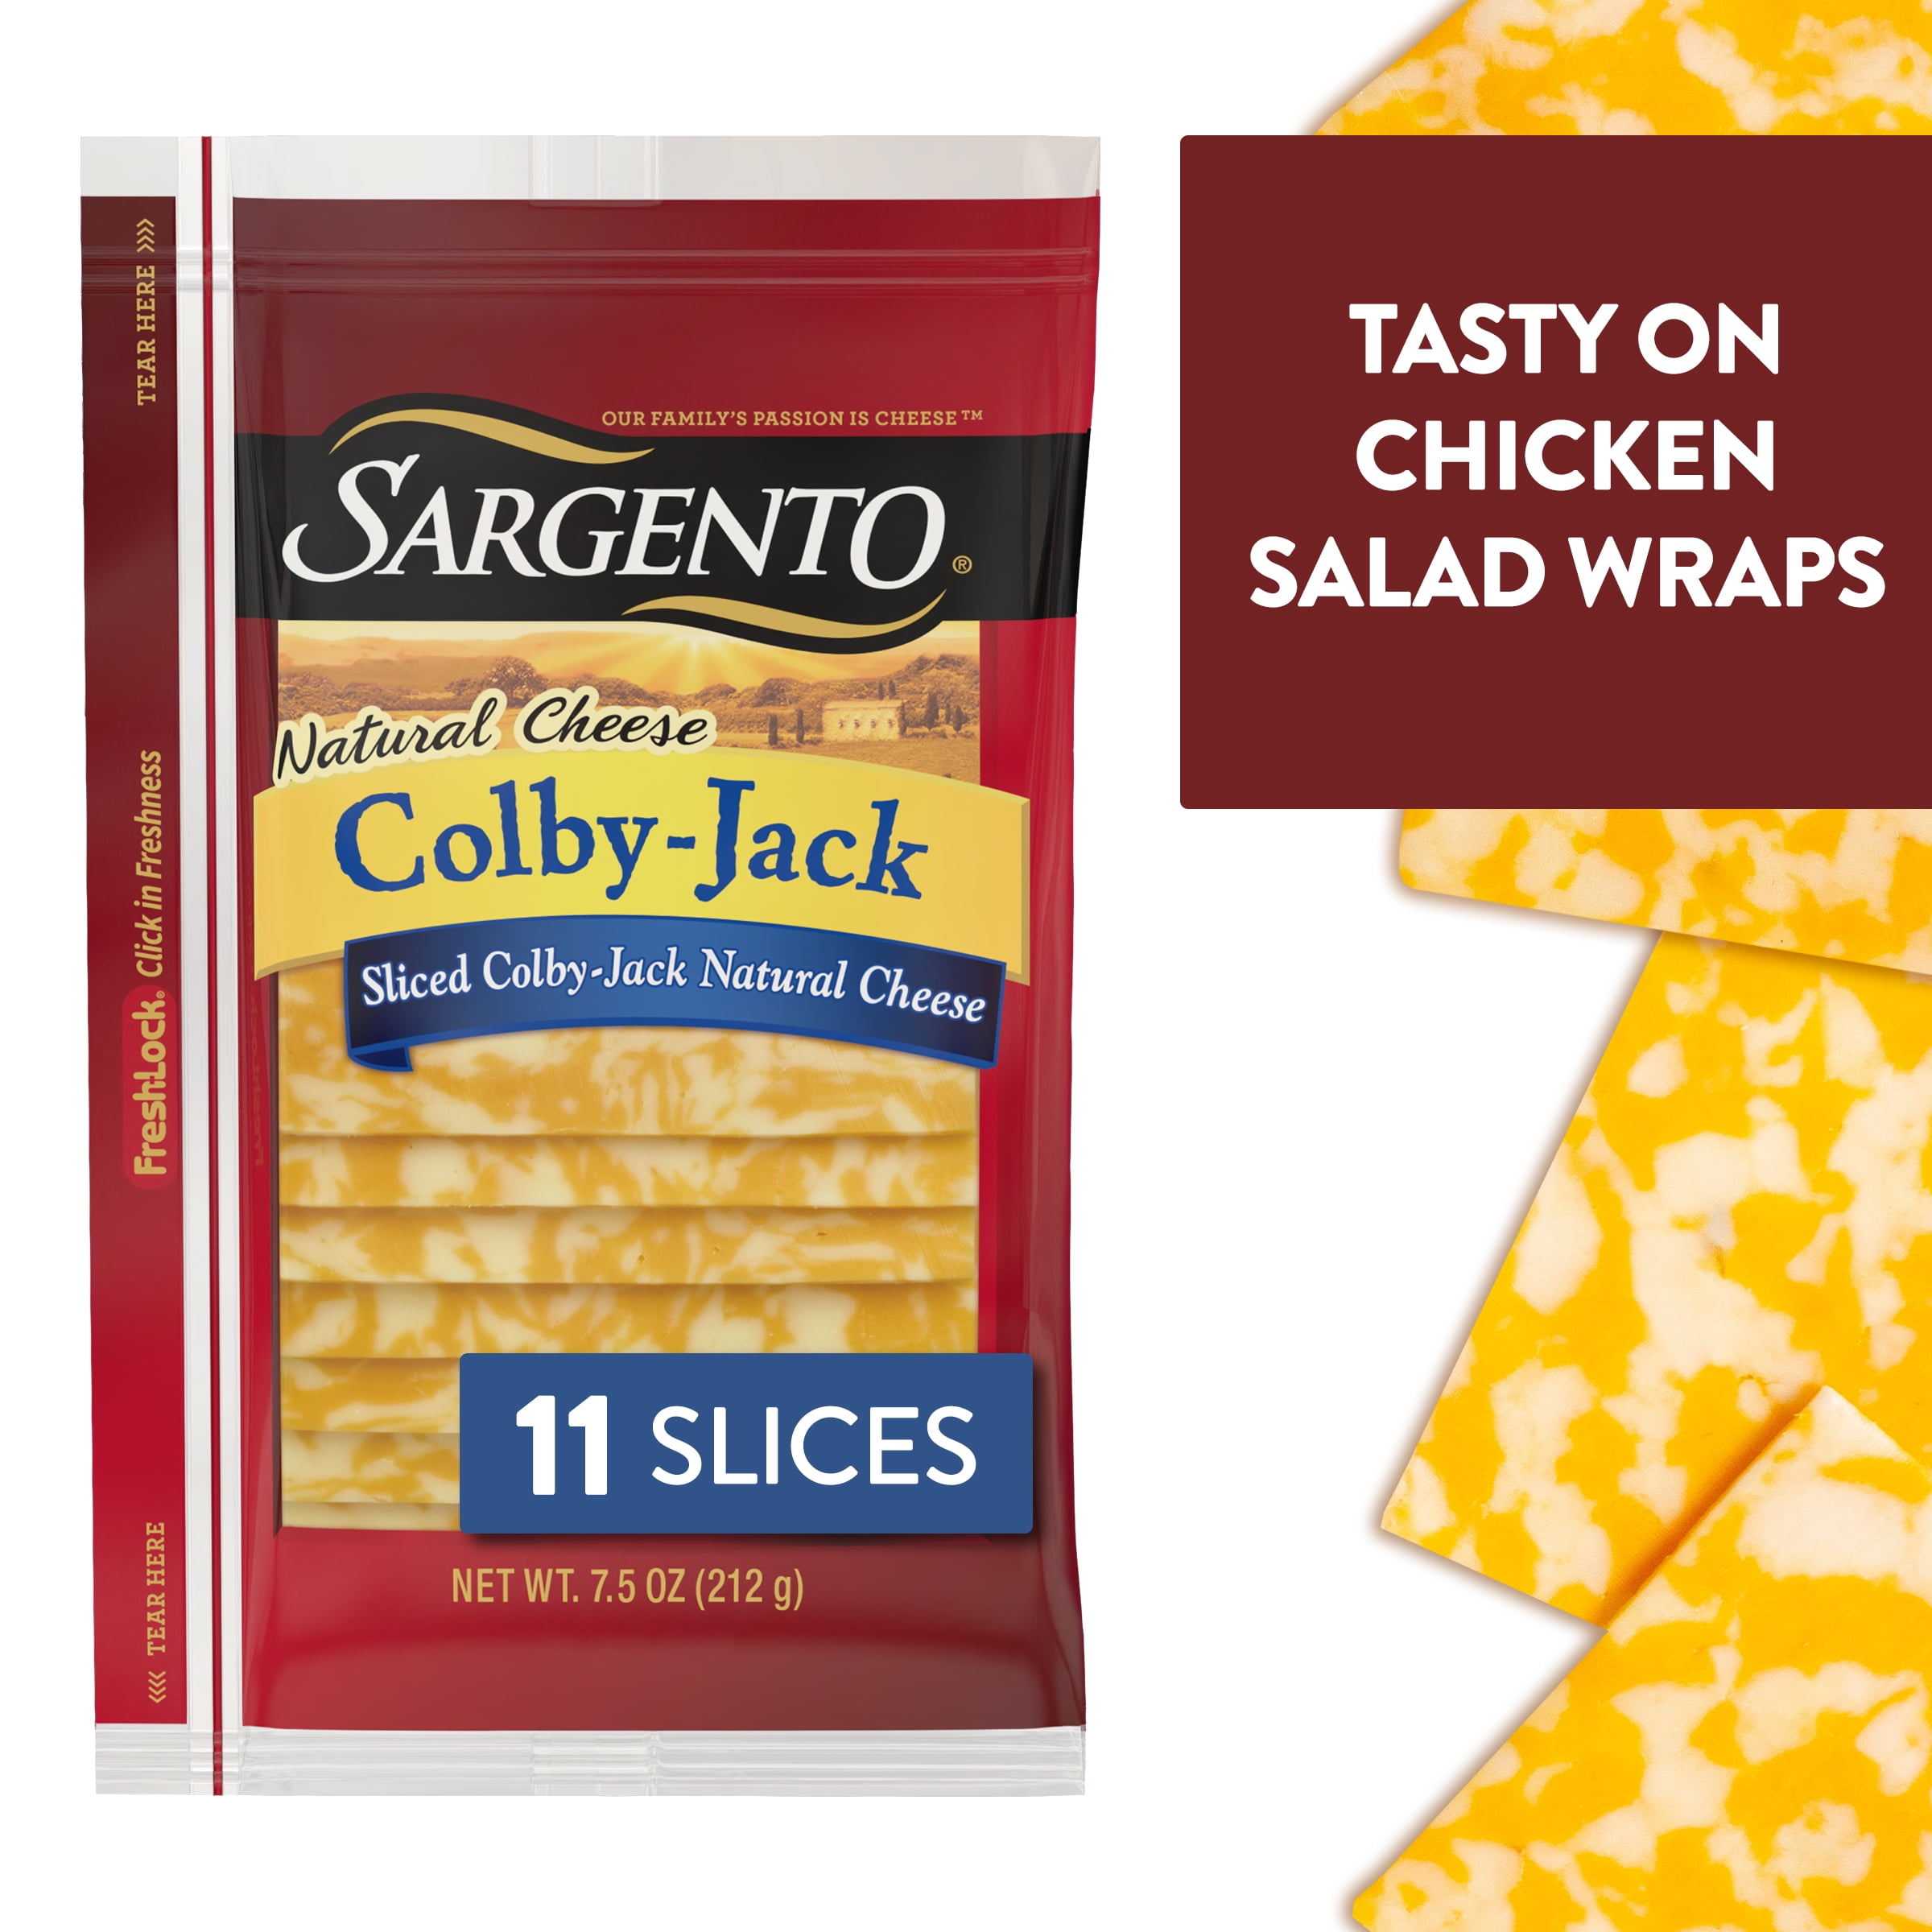 Sargento Sliced Colby-Jack Natural Cheese, 11 slices